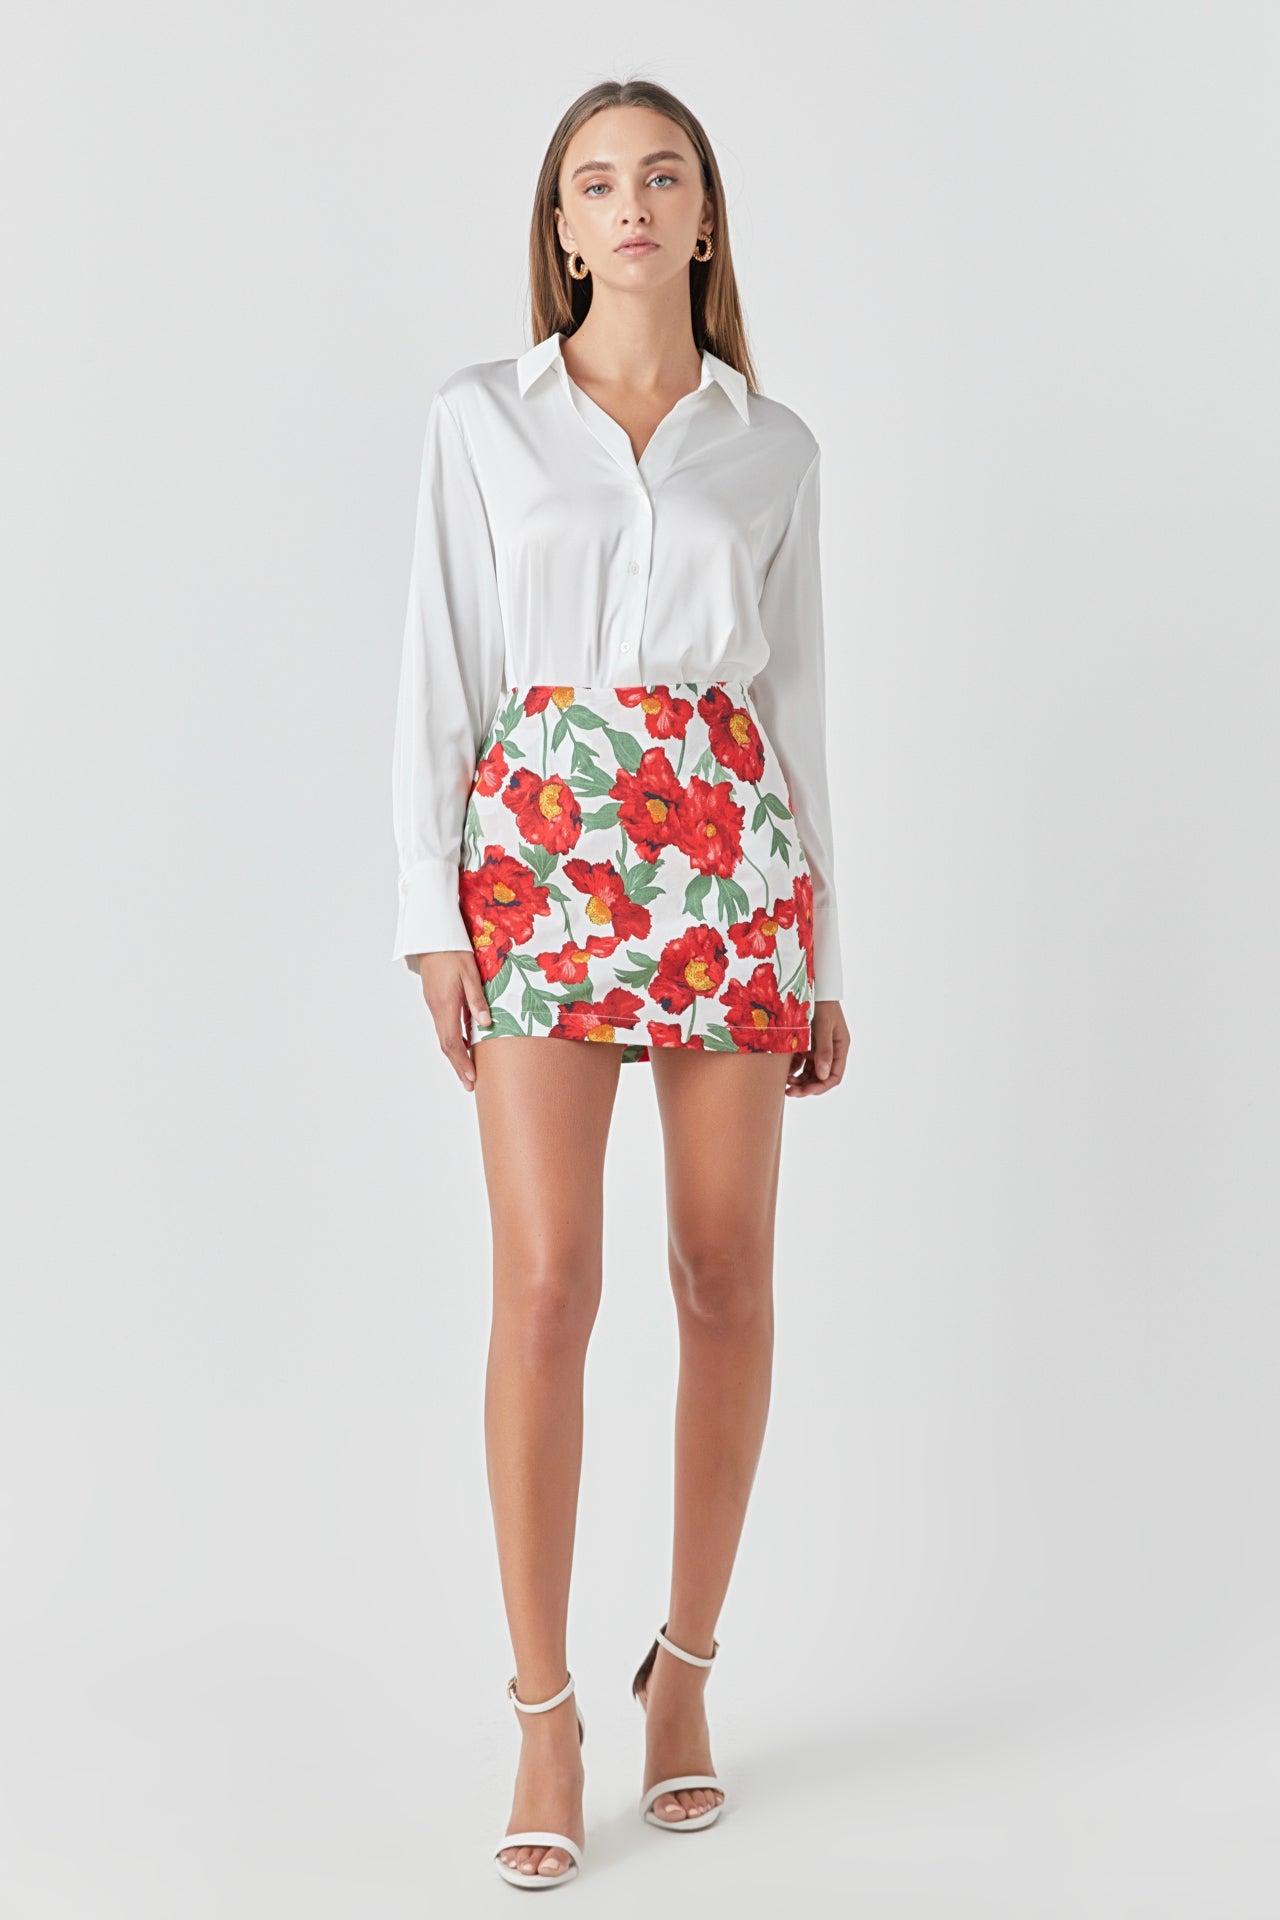 ENDLESS ROSE - Cotton Floral Print Mini Skort - SKORTS available at Objectrare